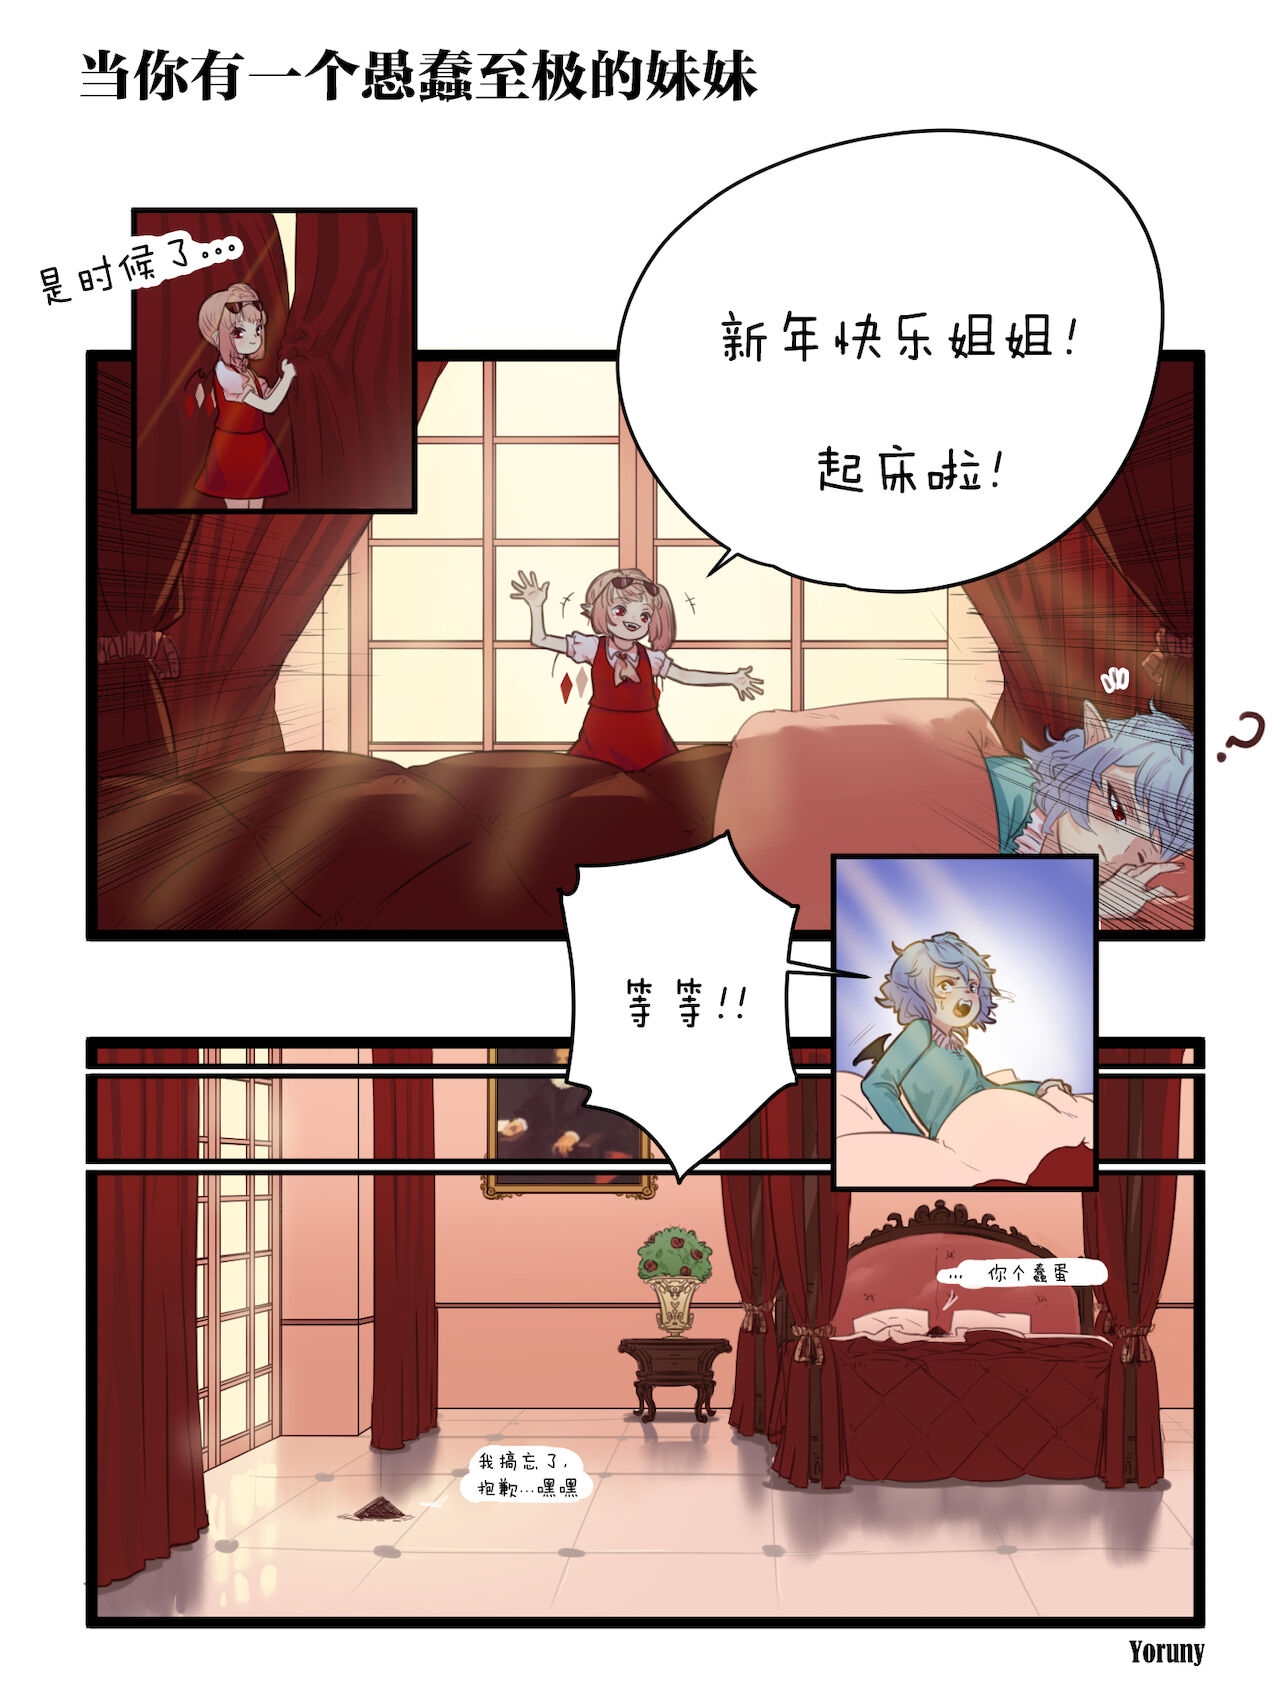 [yoruny] The Scarlet Travel Diary (Touhou Project) [Chinese] [白杨汉化组] 24